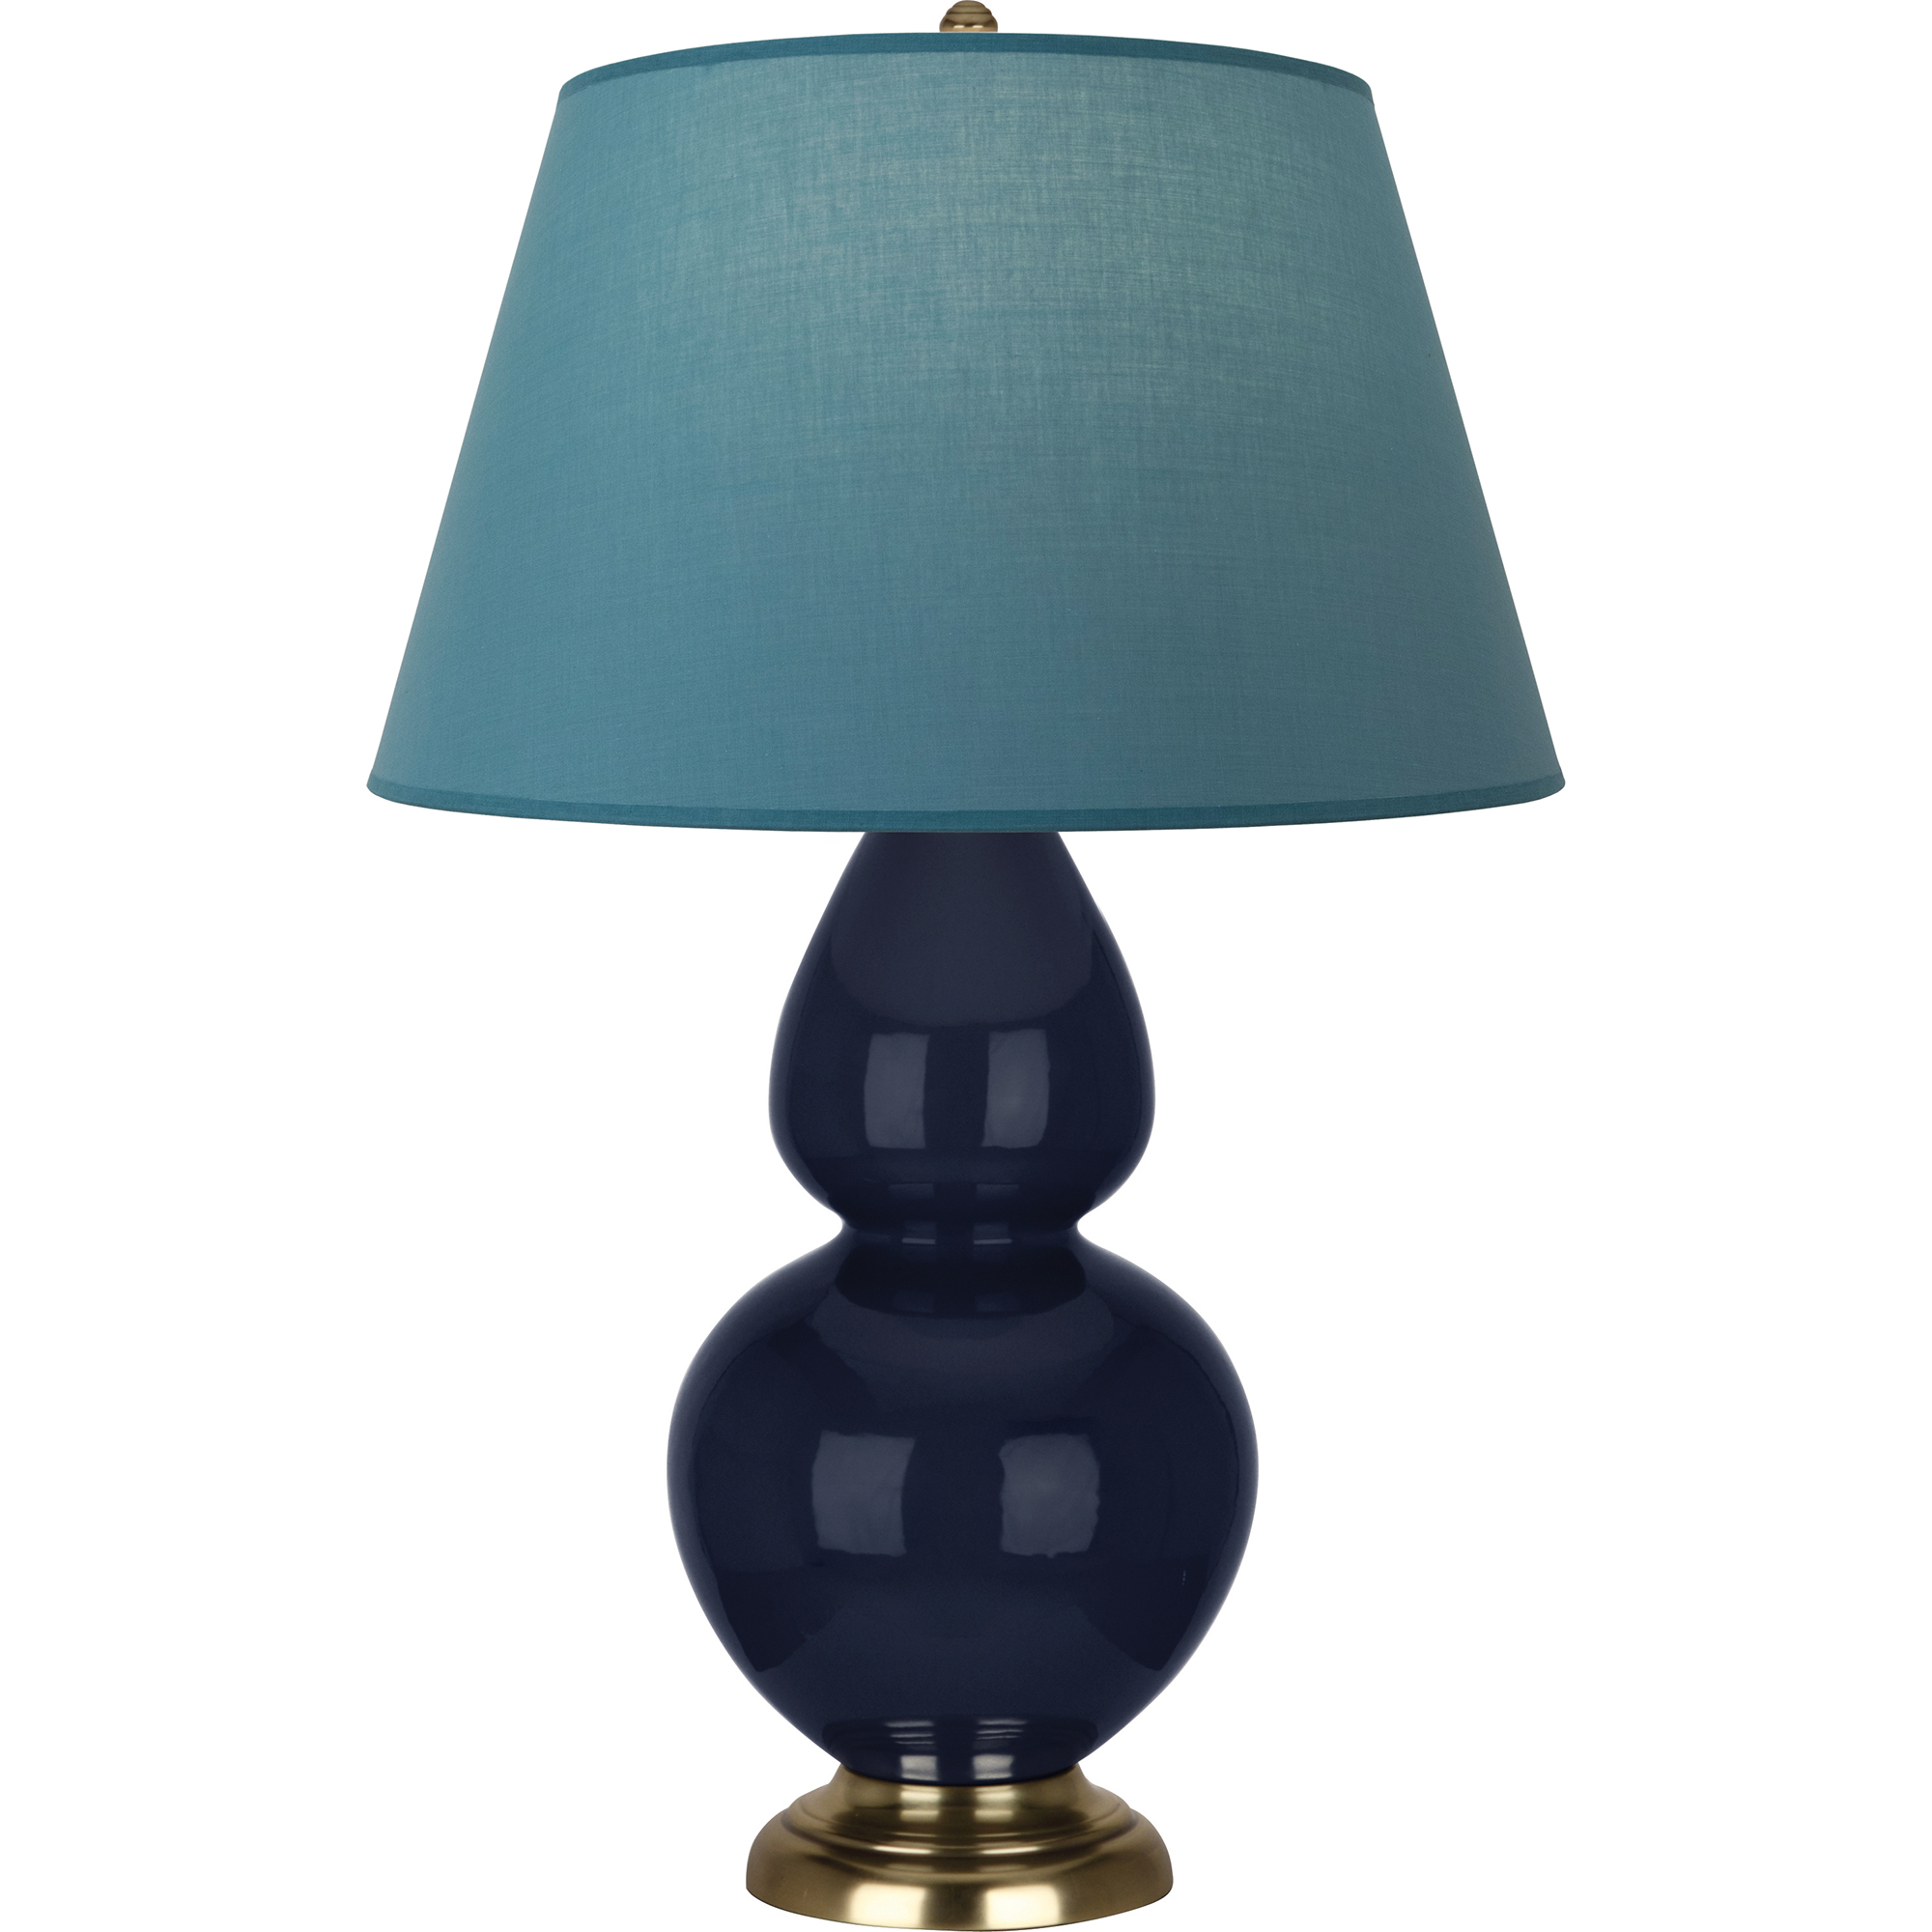 Double Gourd Table Lamp Style #MB20B